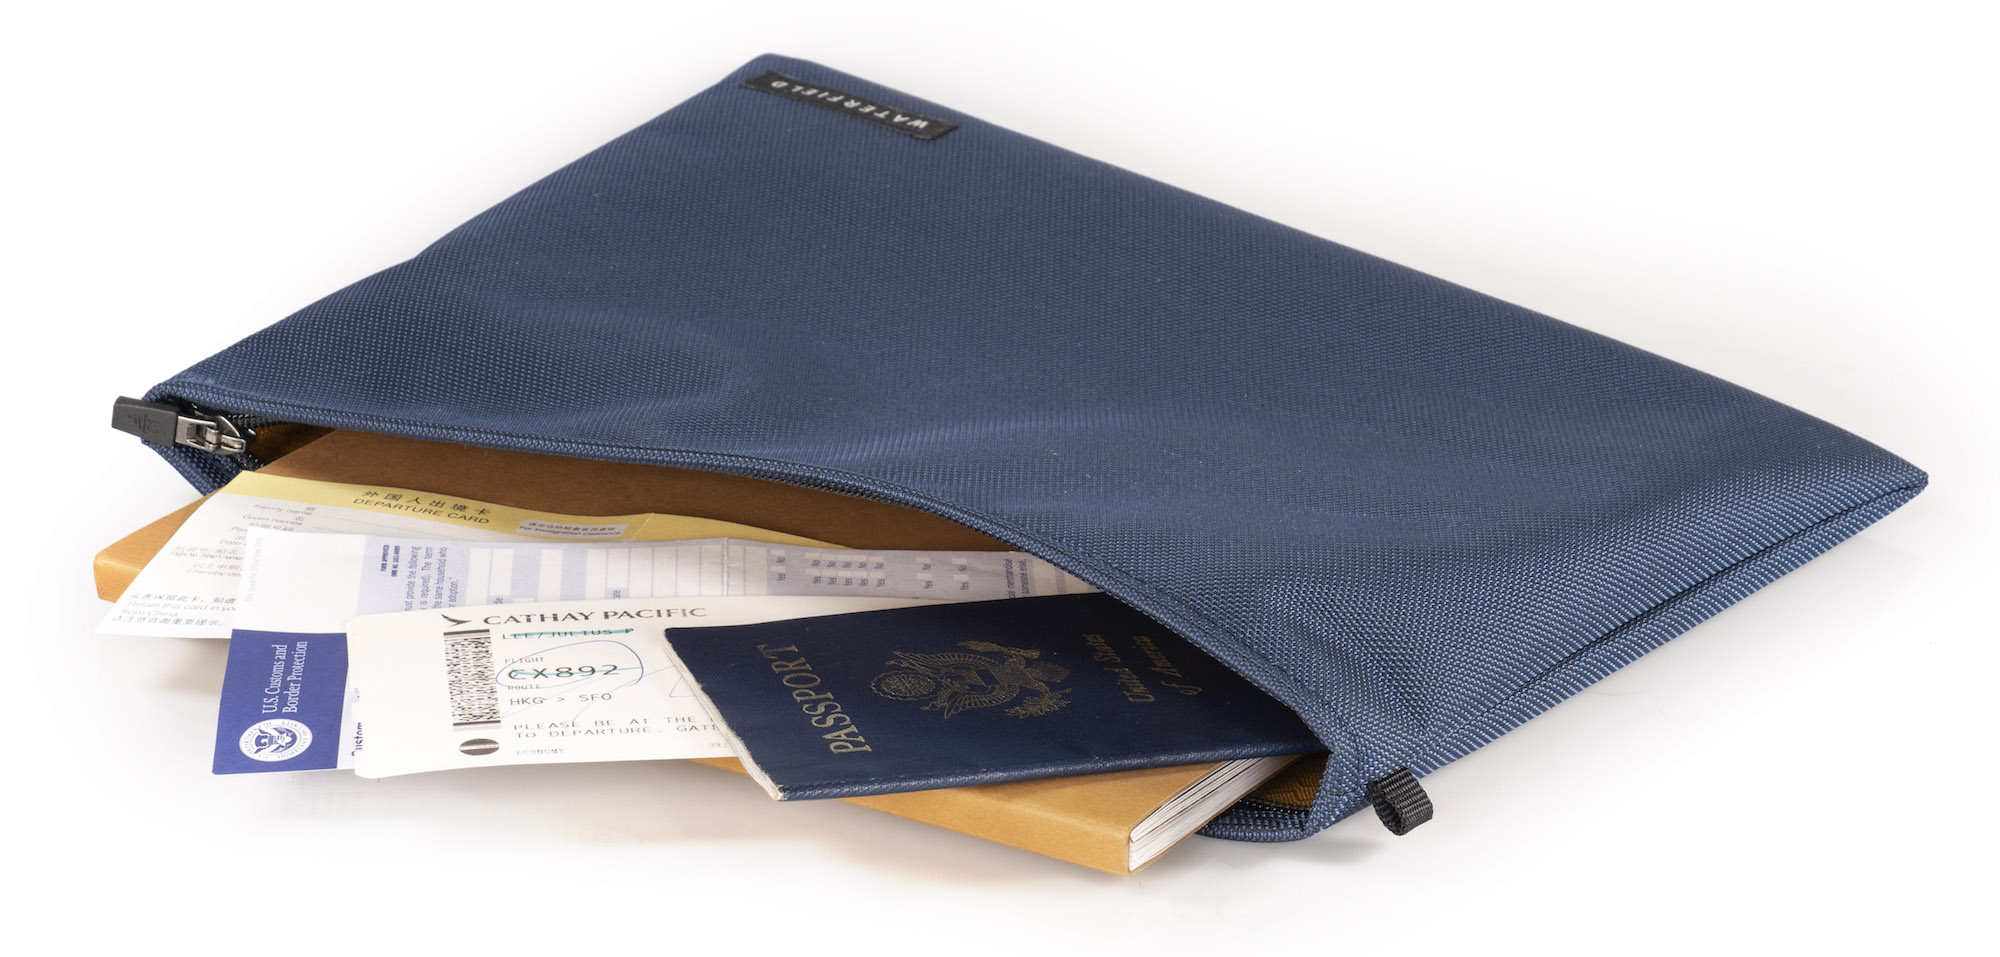 Waterfield's new Travel Folio now up for pre-order